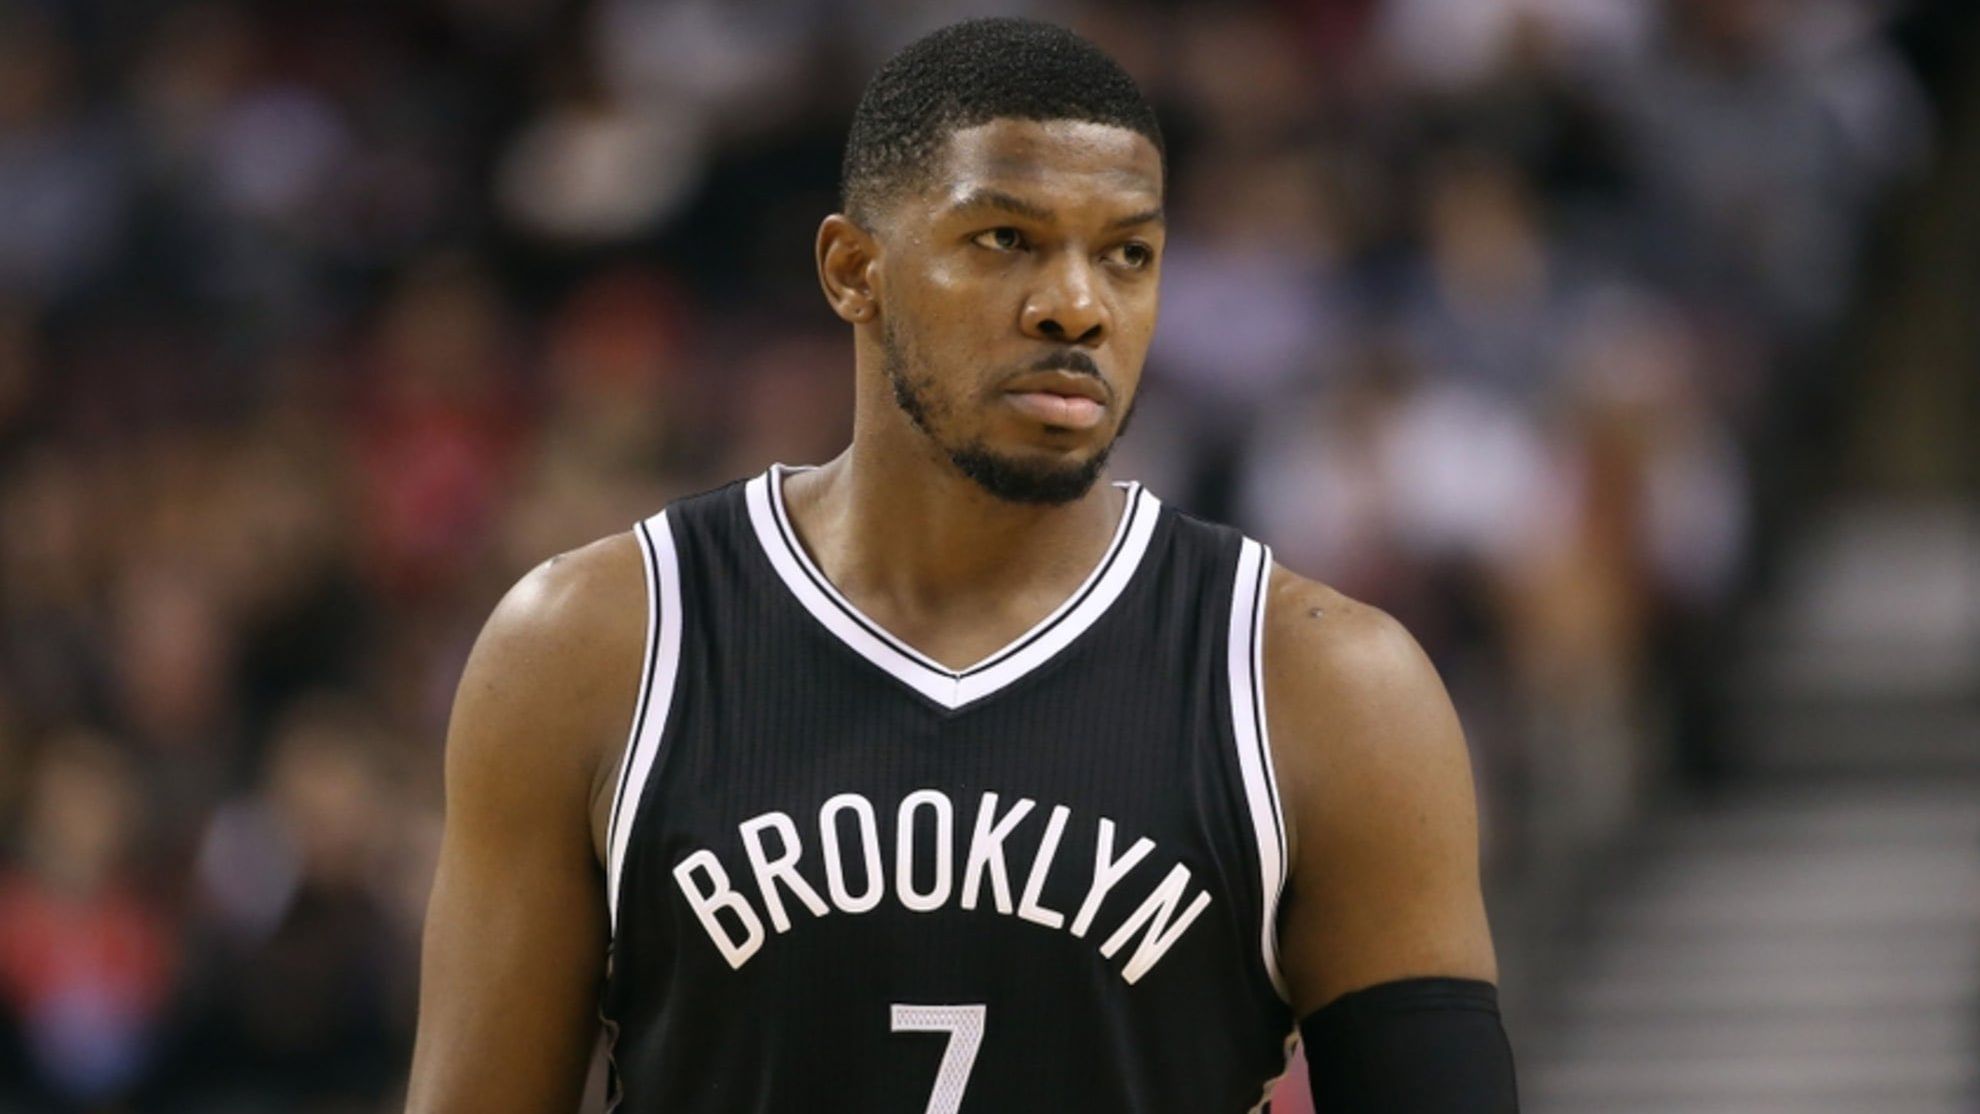 Joe Johnson NBA: Who is the Celtic's new player with a 10 day contract?